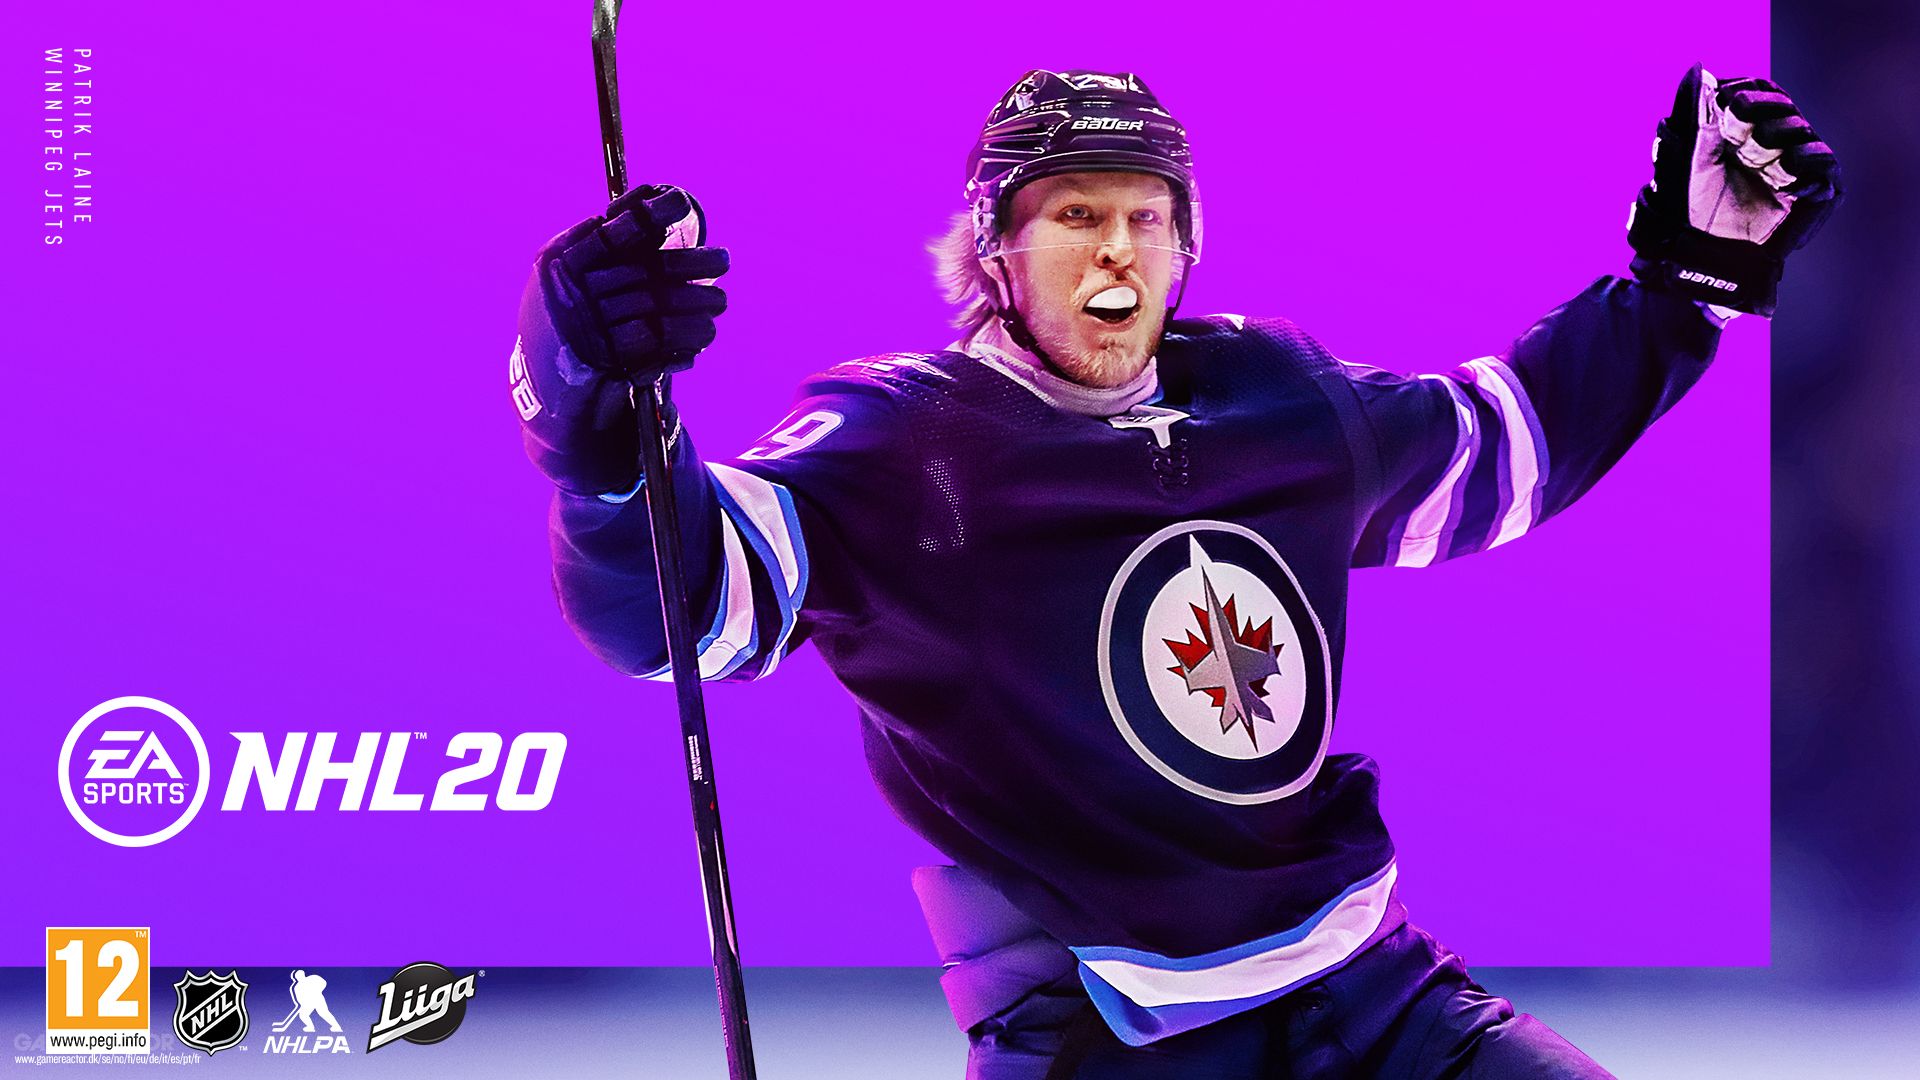 Leafs gaming league for nhl returns this month